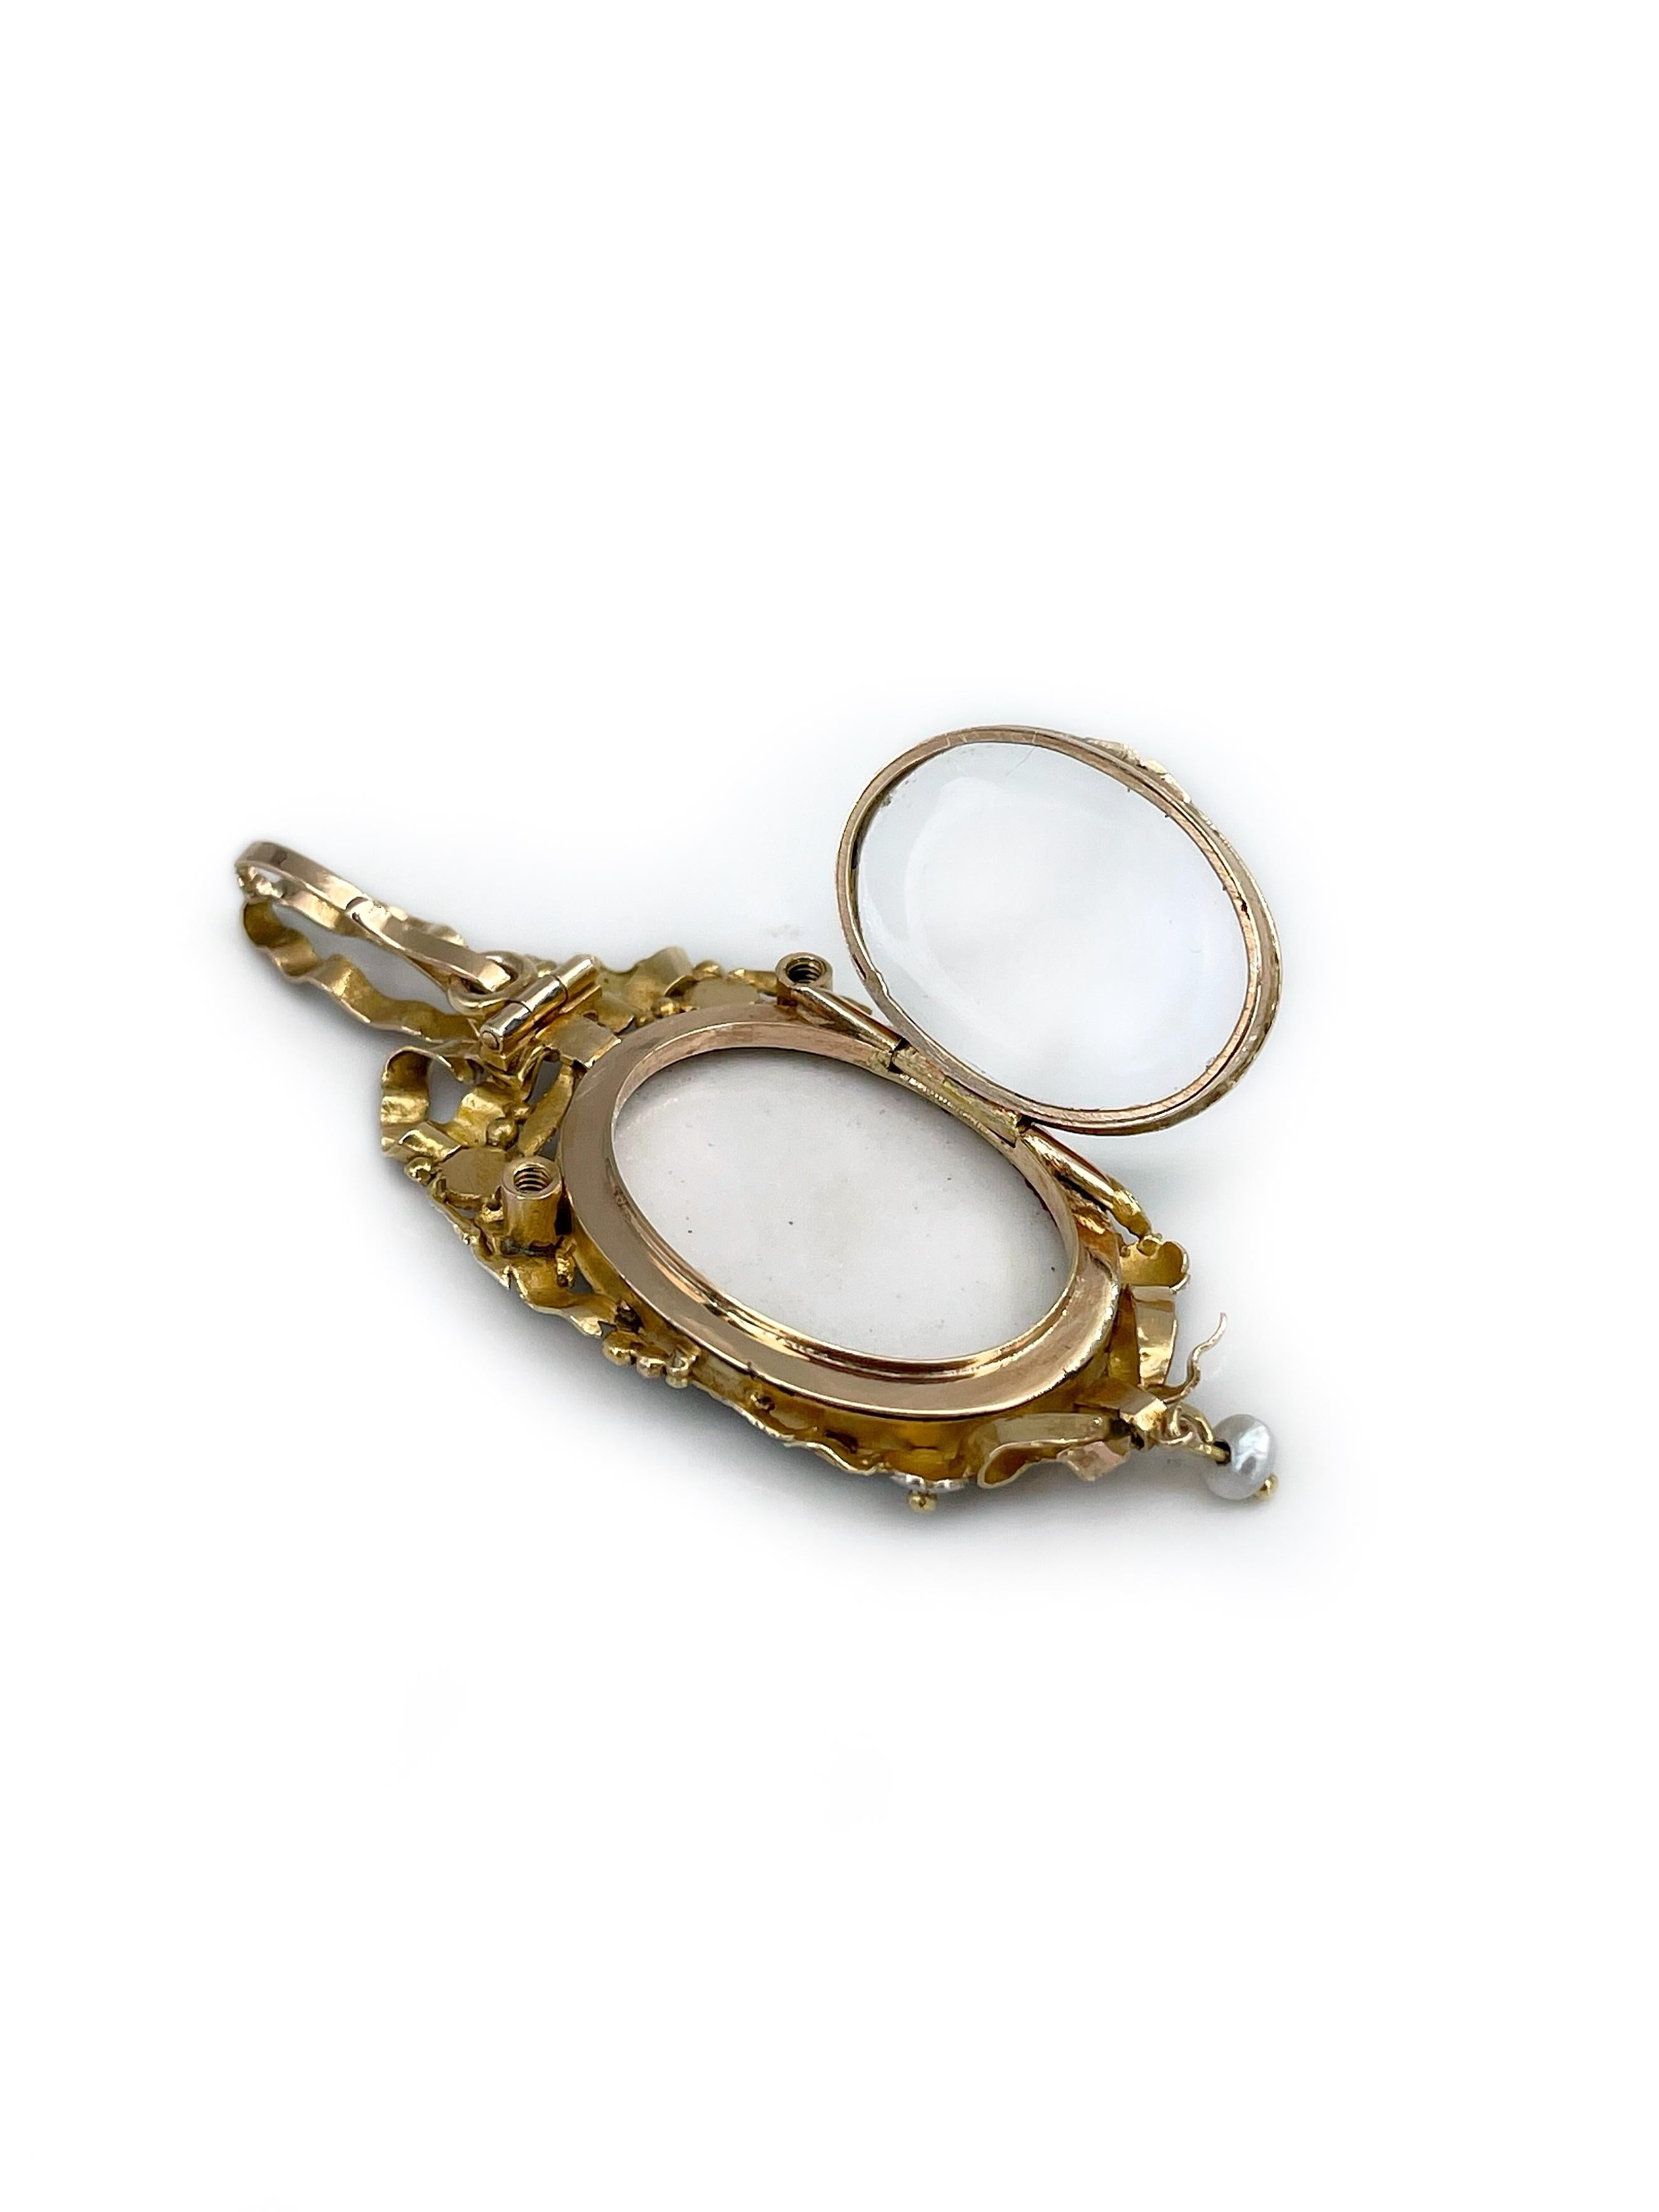 This is a gorgeous Victorian oval locket pendant crafted in 18K gold. Circa 1870. 

The piece features miniature portrait depicting a cherub with flute. It is hand painted in enamel. Pendant is highly decorated and has a small pearl drop.

Weight: